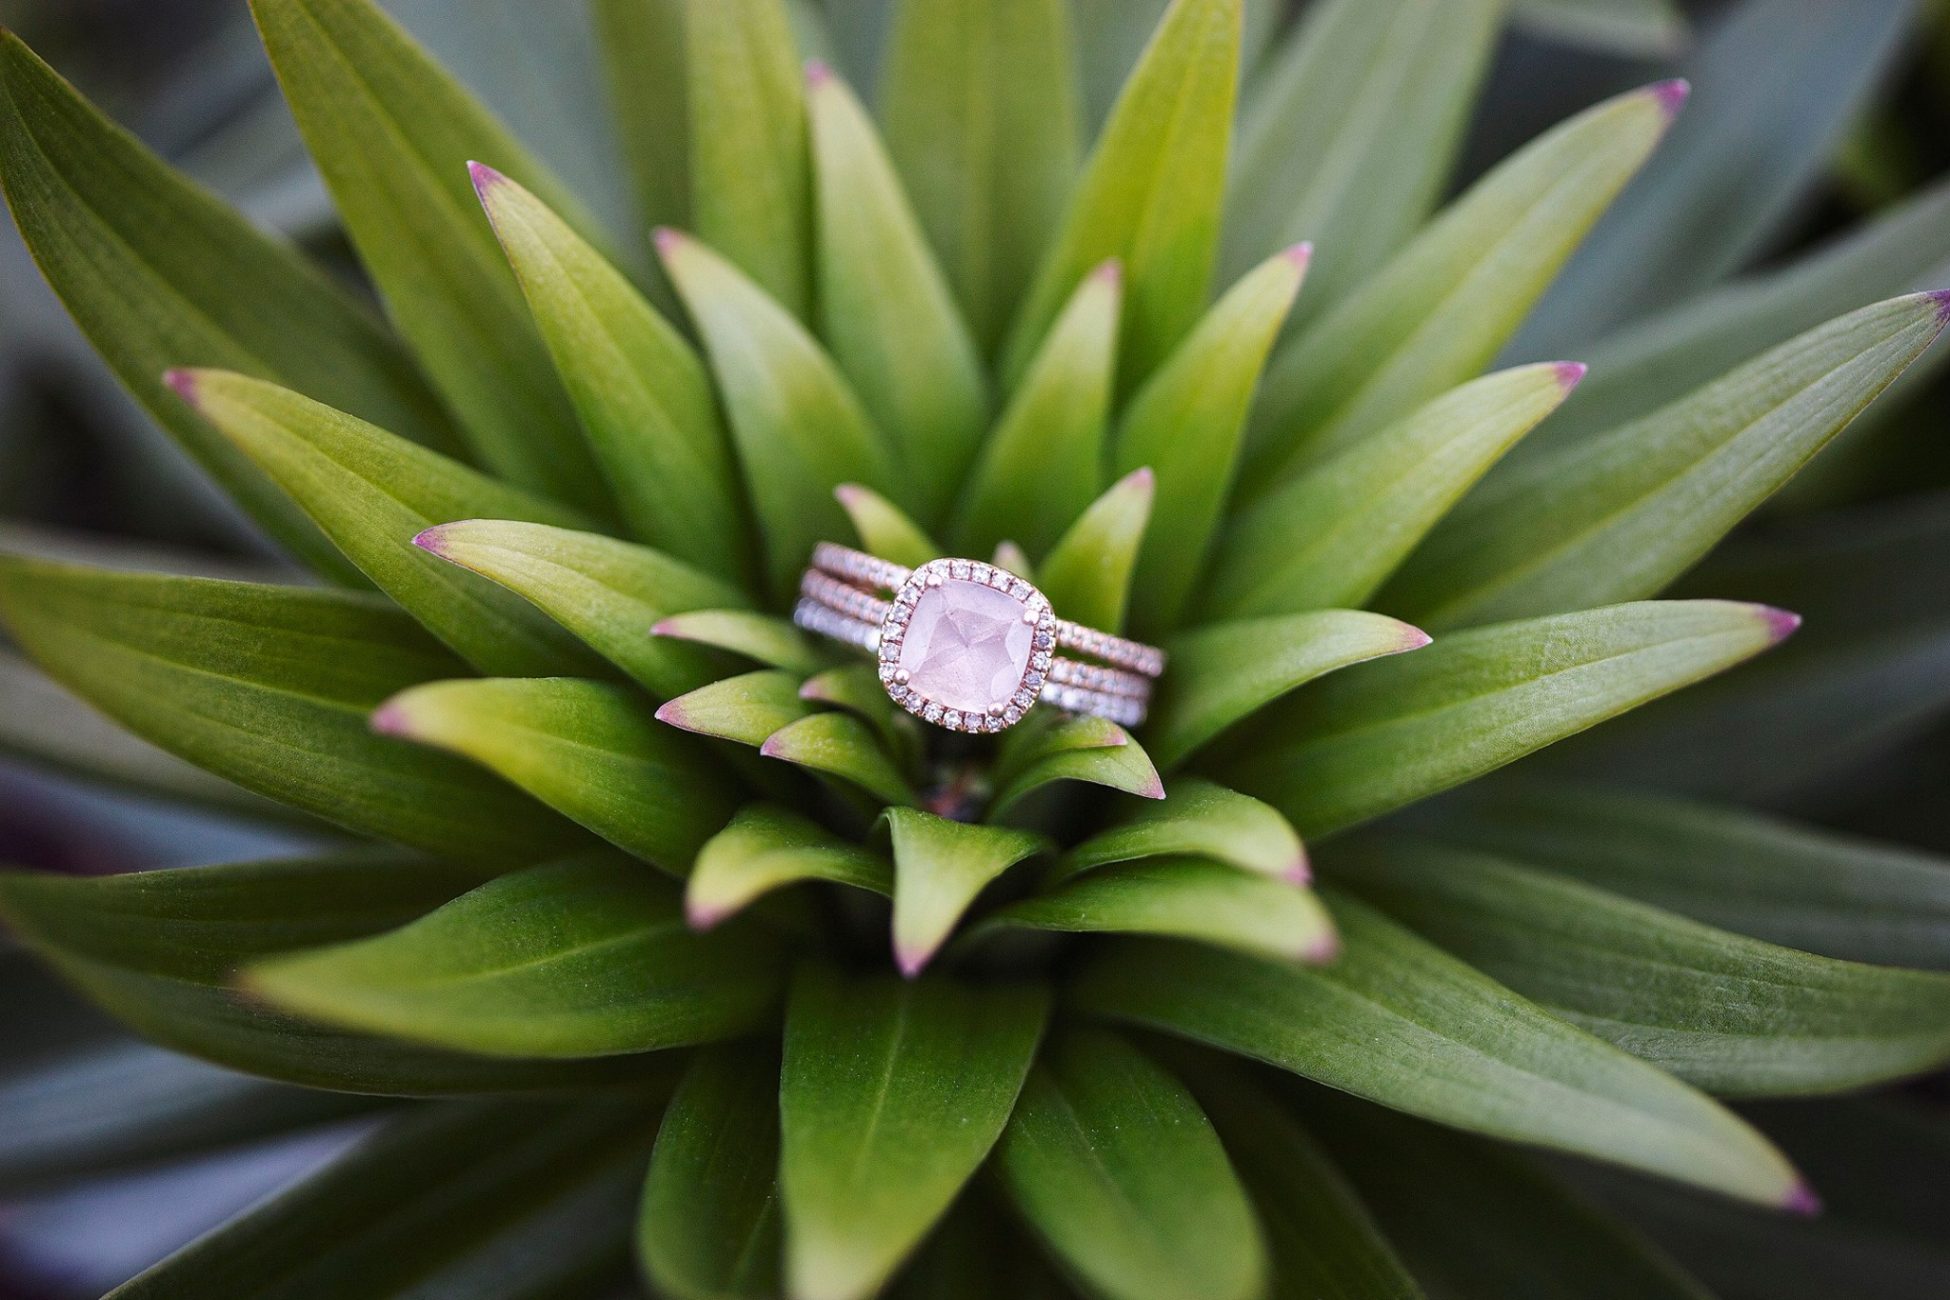 Beautiful wedding ring photographed in the center of a beautiful succulent plant